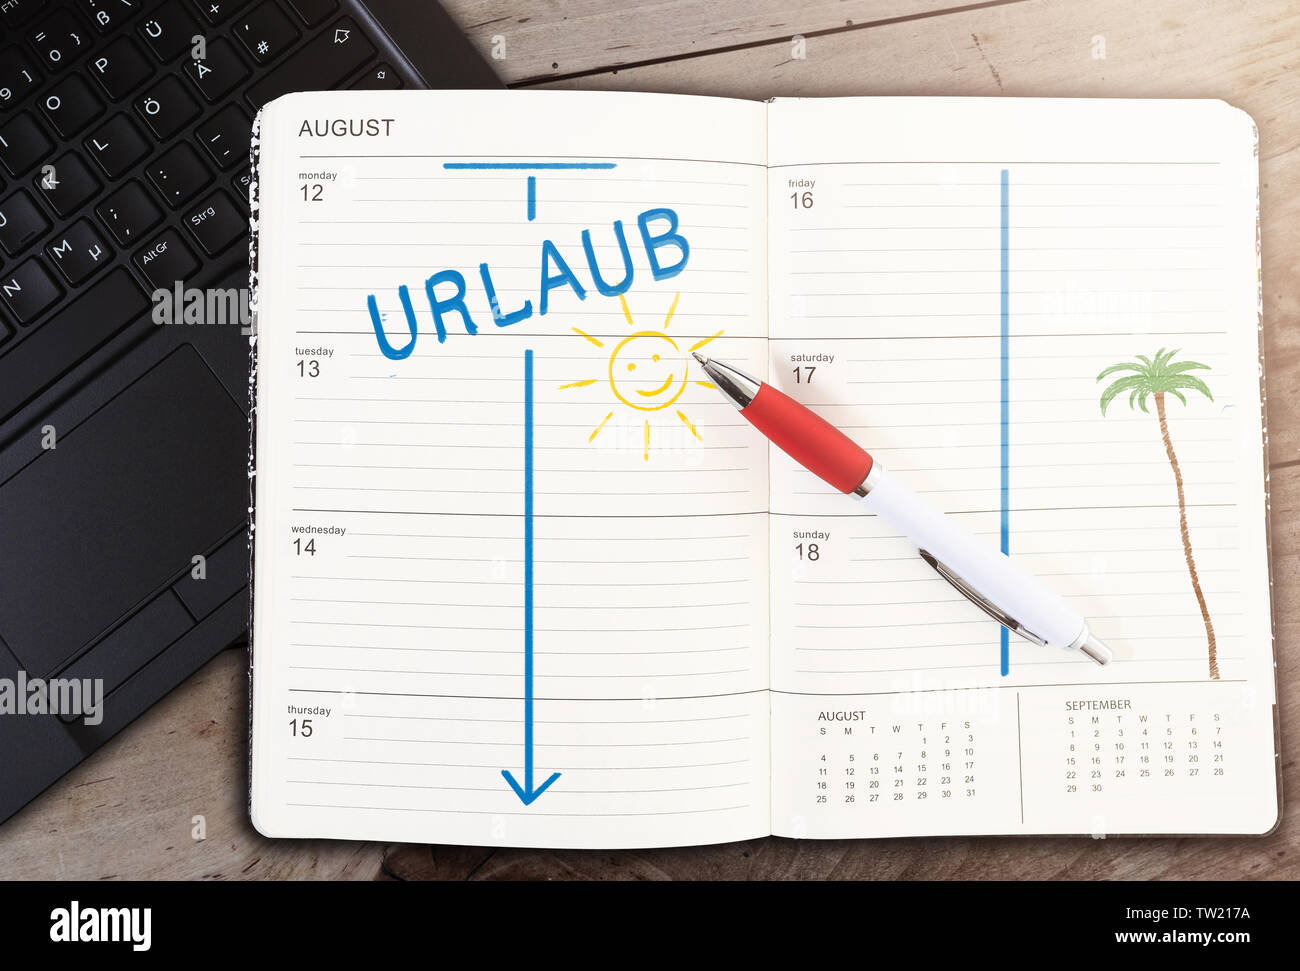 top view of calendar on table with word URLAUB, German for vacation, and sun icon against wooden table Stock Photo